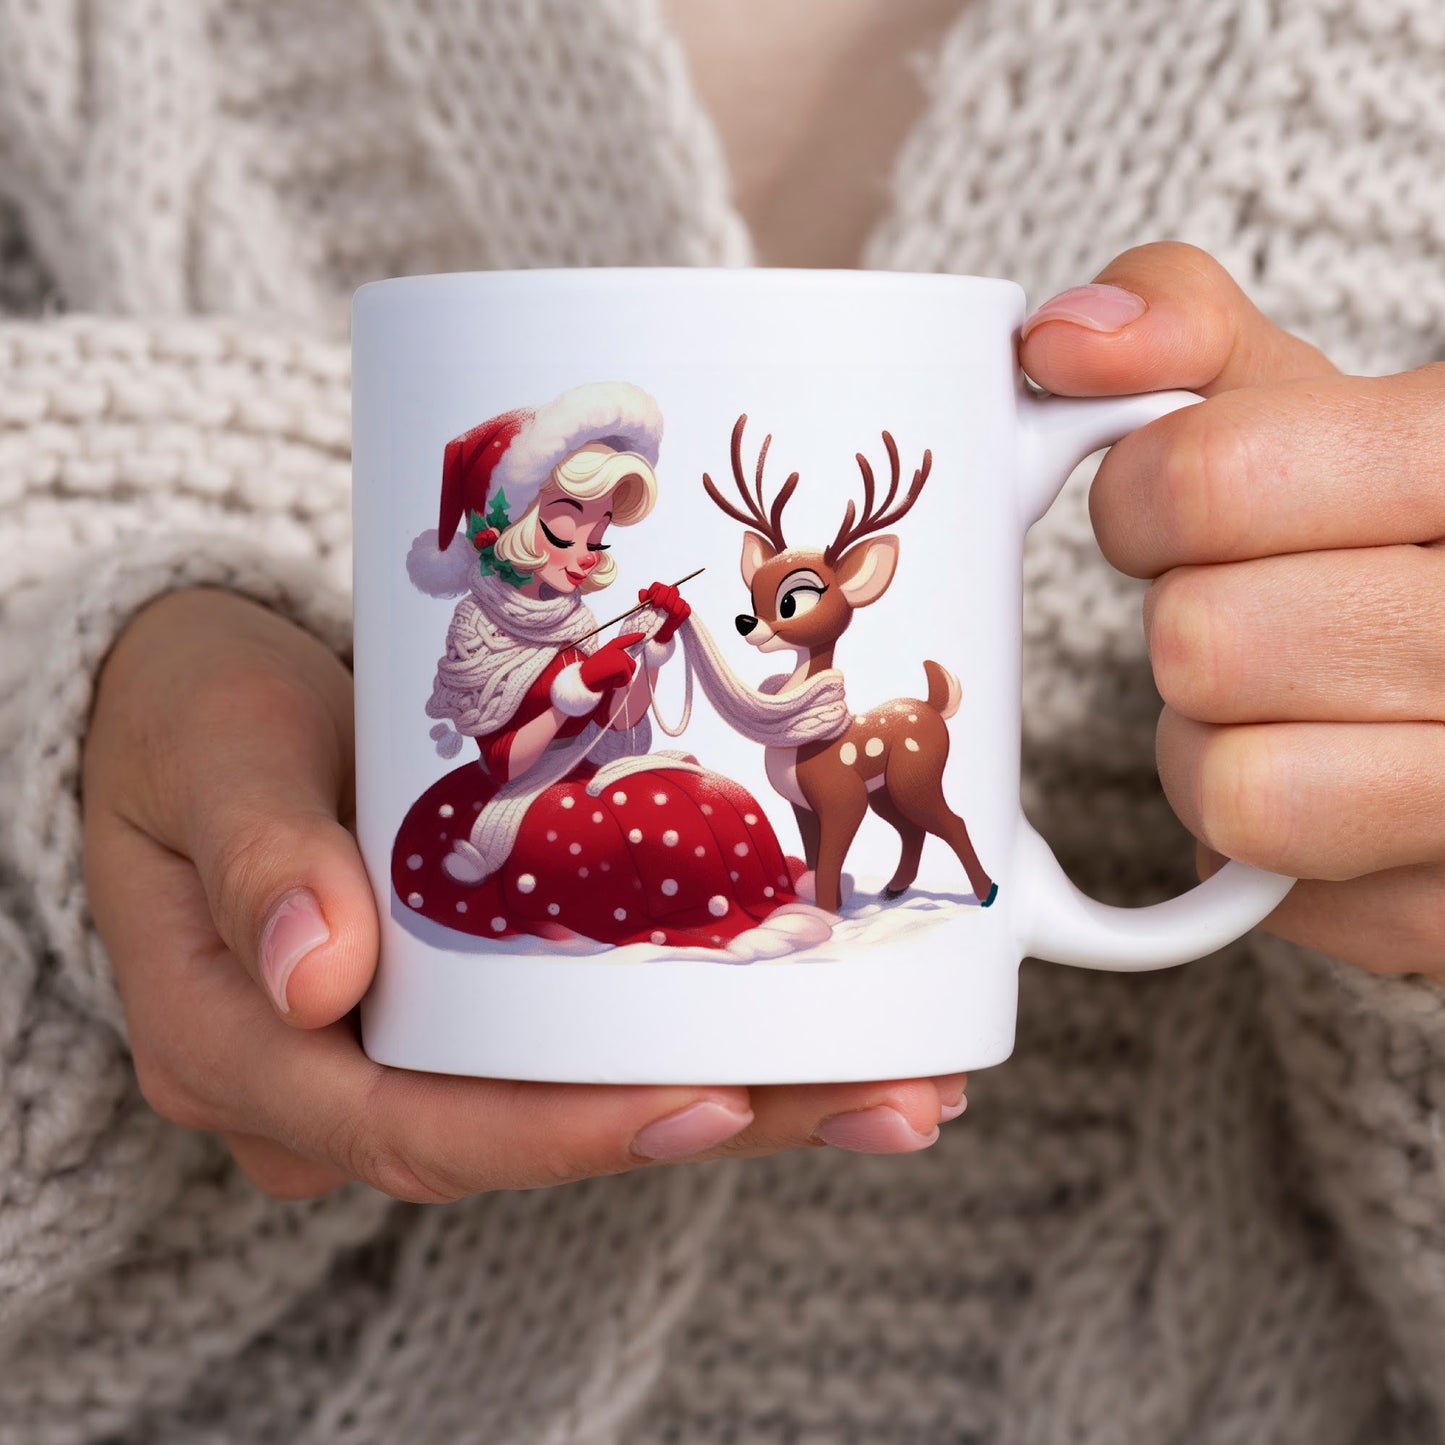 Claus and Reindeer Mug, Unique Christmas Gifts, White Elephant Gifts, Christmas Mug, Mug Christmas Designs, Secret Santa Gift Gift